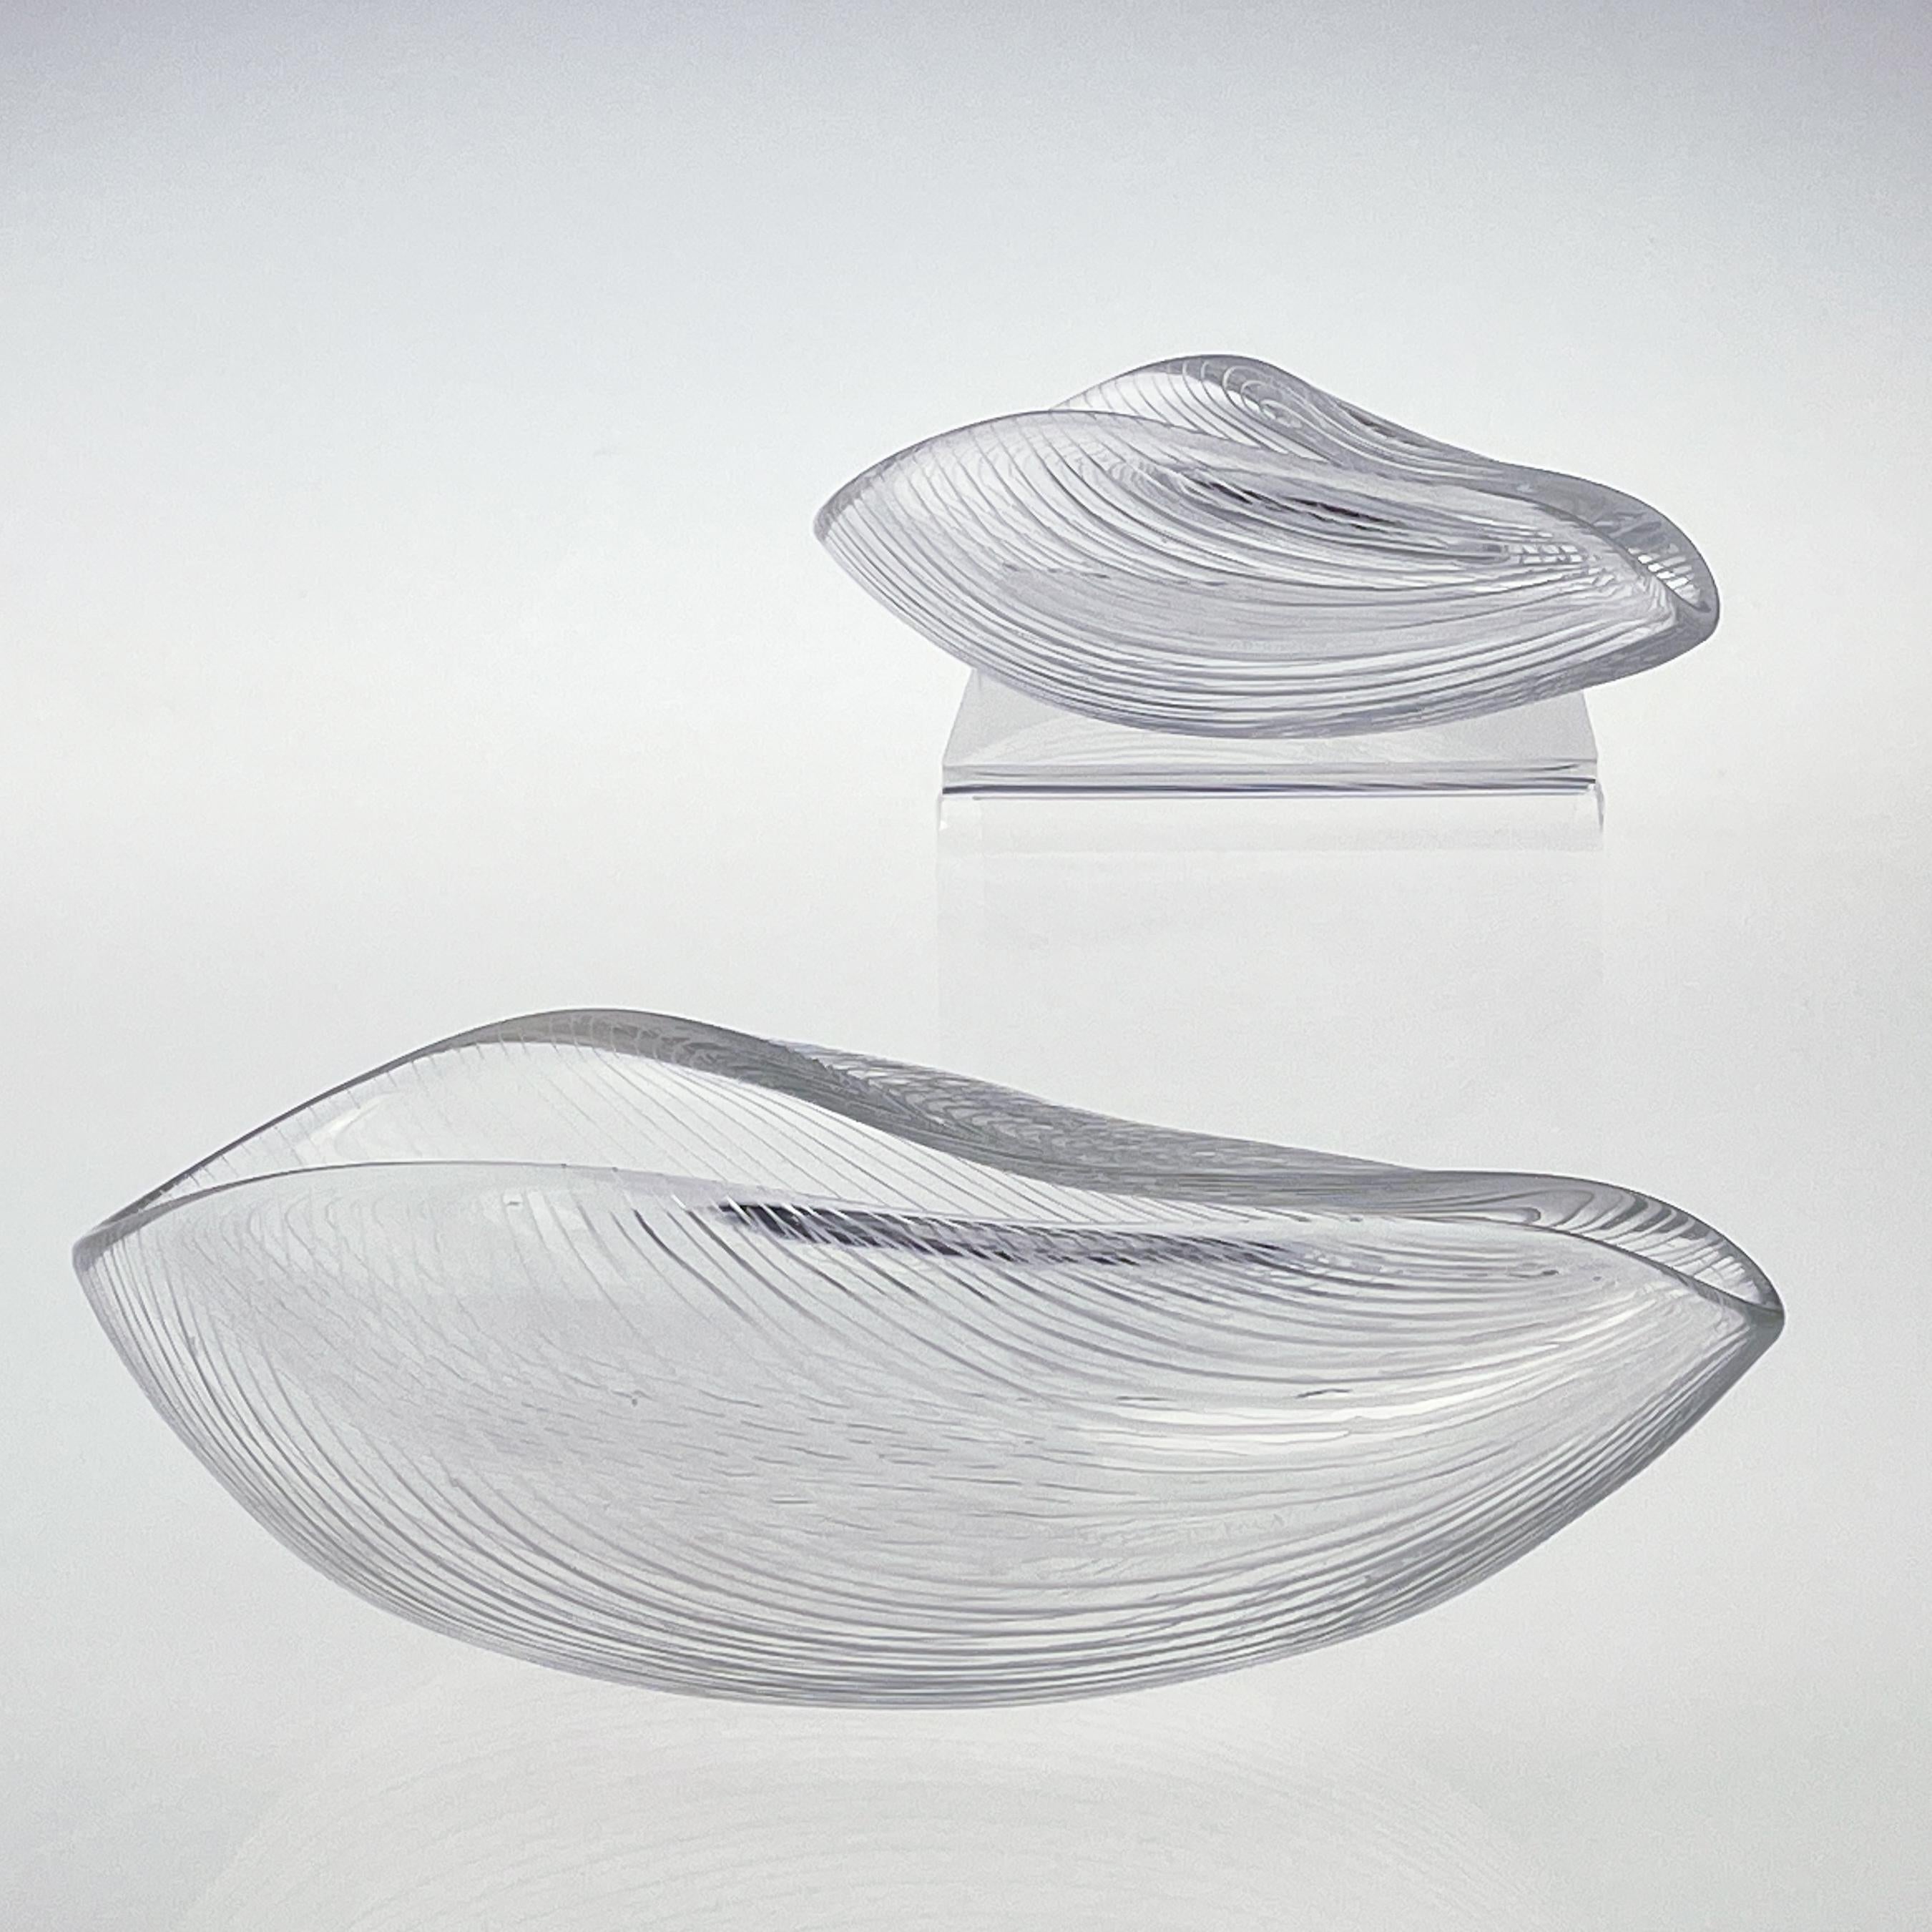 Scandinavian Modern Tapio Wirkkala Two Line Cut Crystal Art Bowls Handblown 

Two line cut, chair worked crystal art-object, Model 3342, expertly designed by the renowned Tapio Wirkkala in 1953. Crafted with utmost care by the skilled artisans of